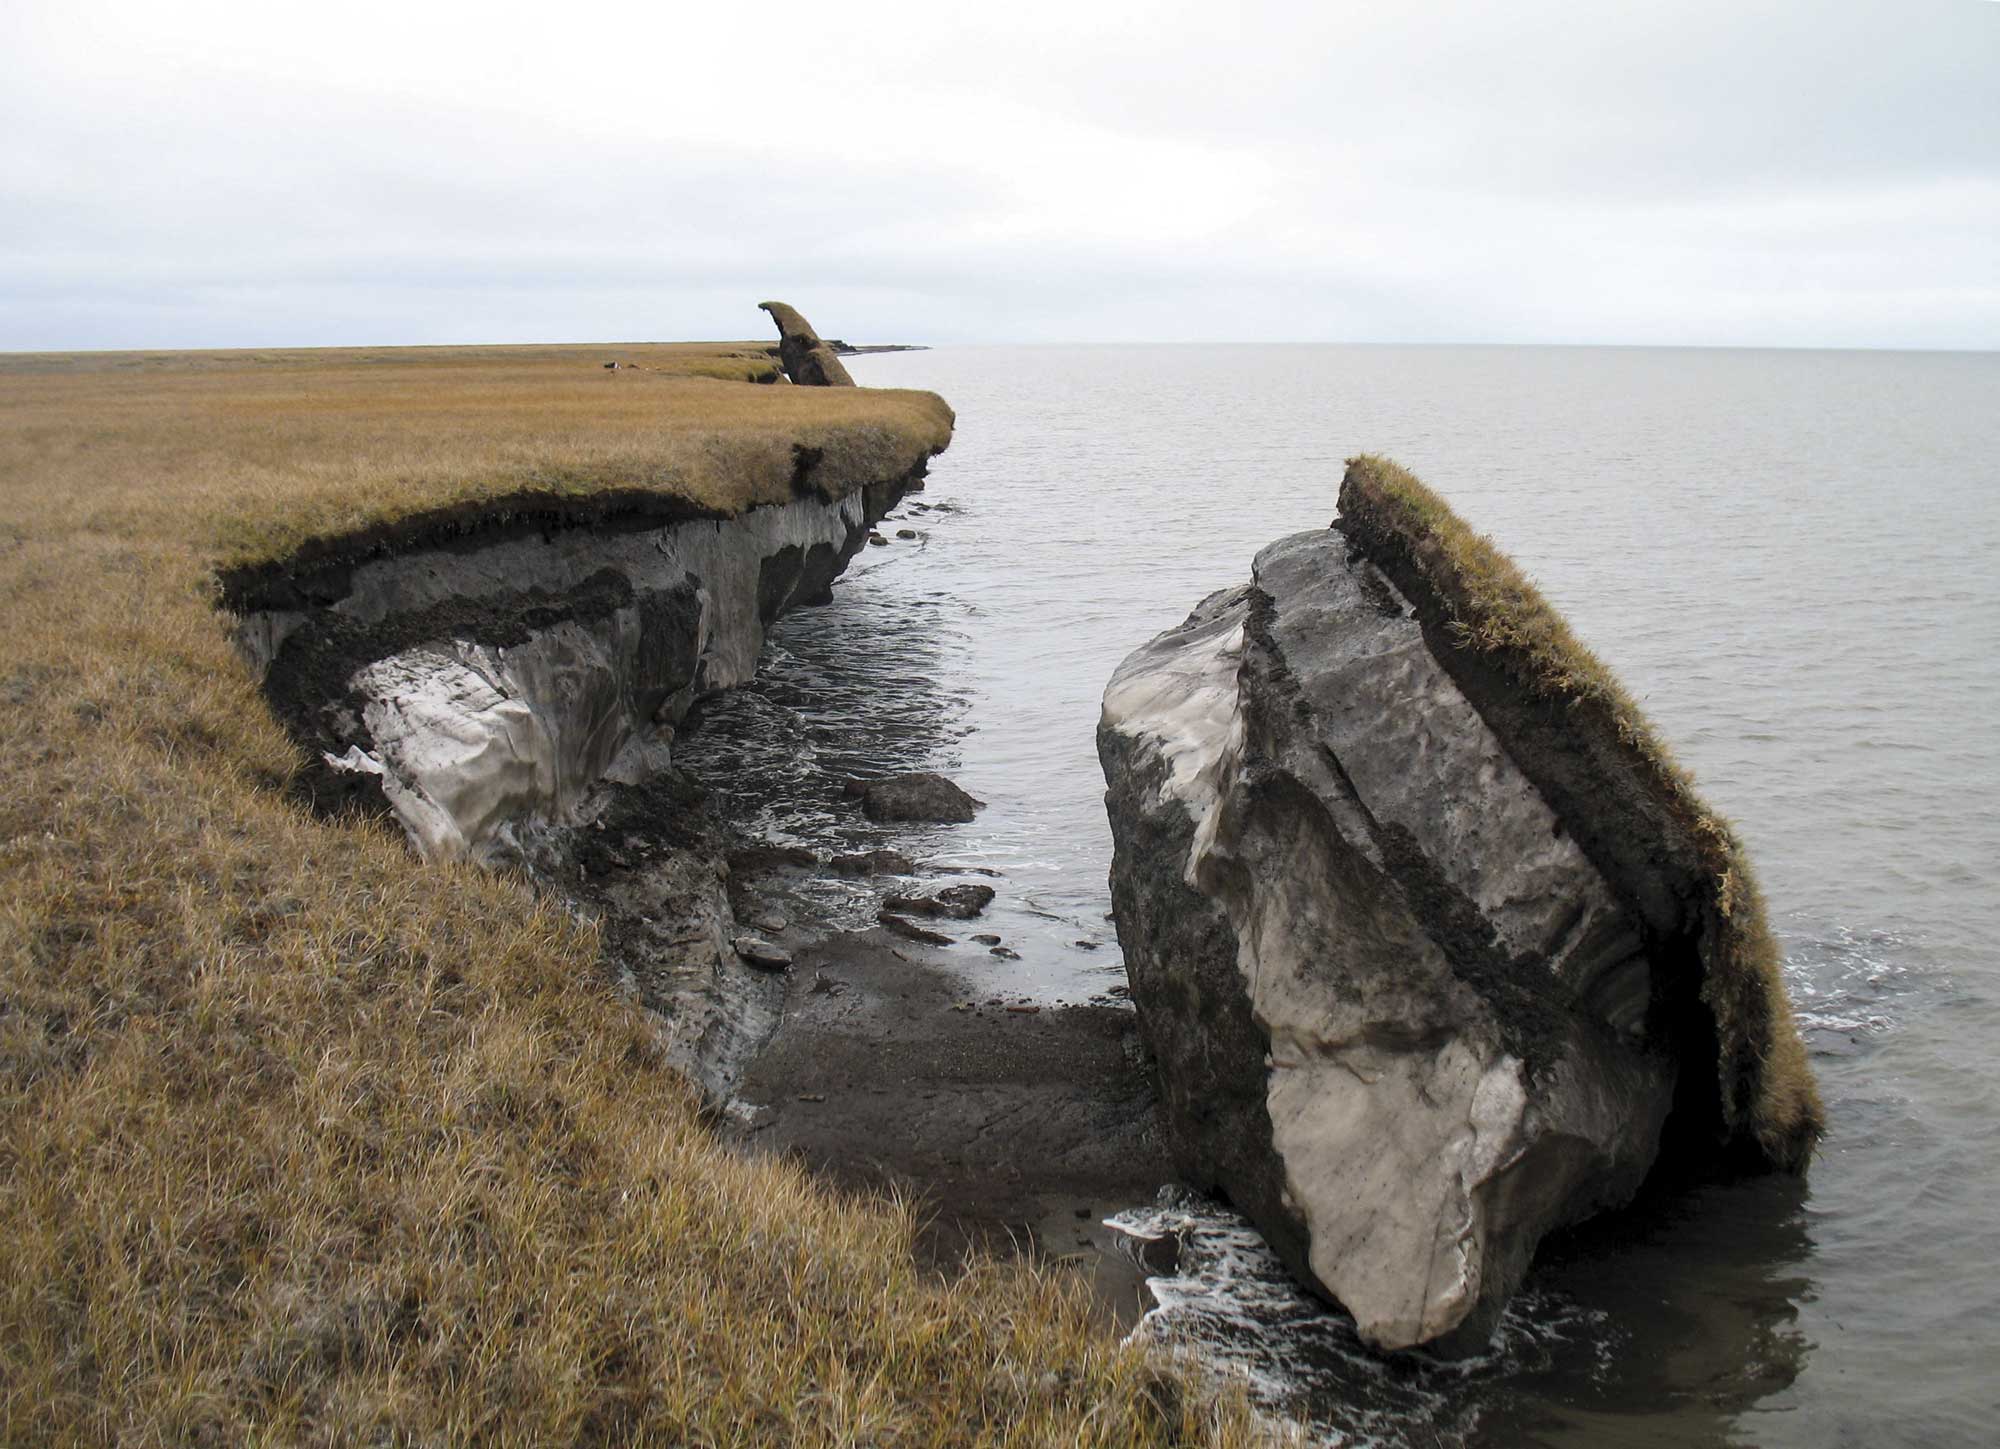 In this photo you can see a collapsed block of ice-rich permafrost along Drew Point, Alaska. Coastal bluffs in this region can erode 20 meters/year (~65 feet). USGS scientists continually research the causes of major permafrost thaw and bluff retreat along the Arctic coast of Alaska.